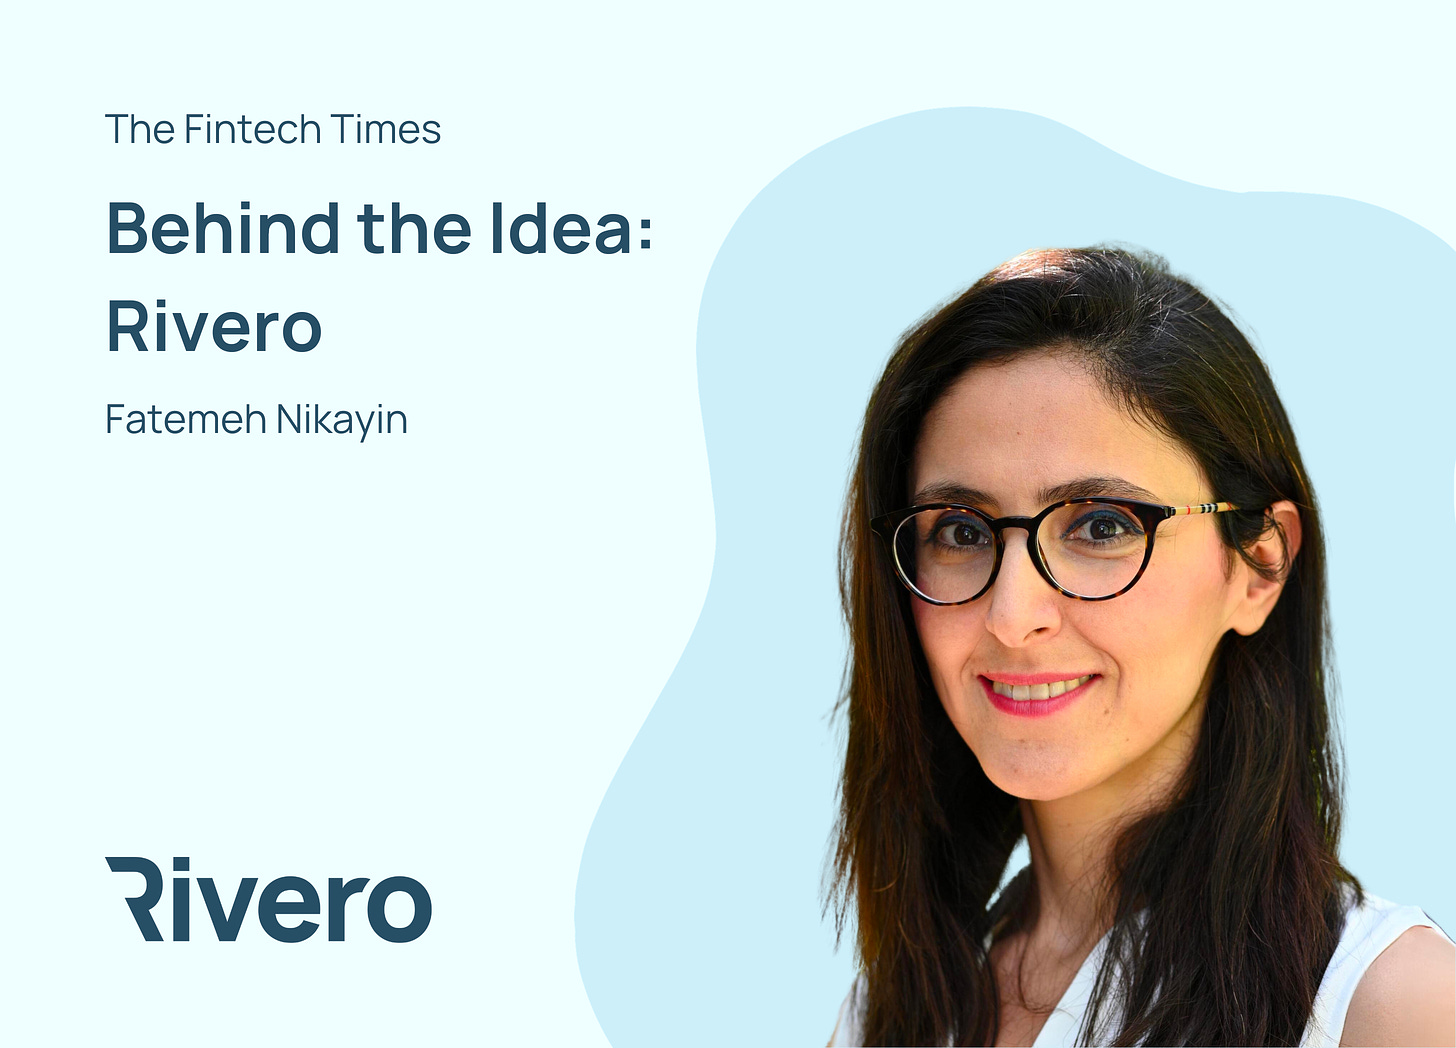 Rivero co-founder Fatemeh Nikayin interview by fintech times titled behind the idea: Rivero